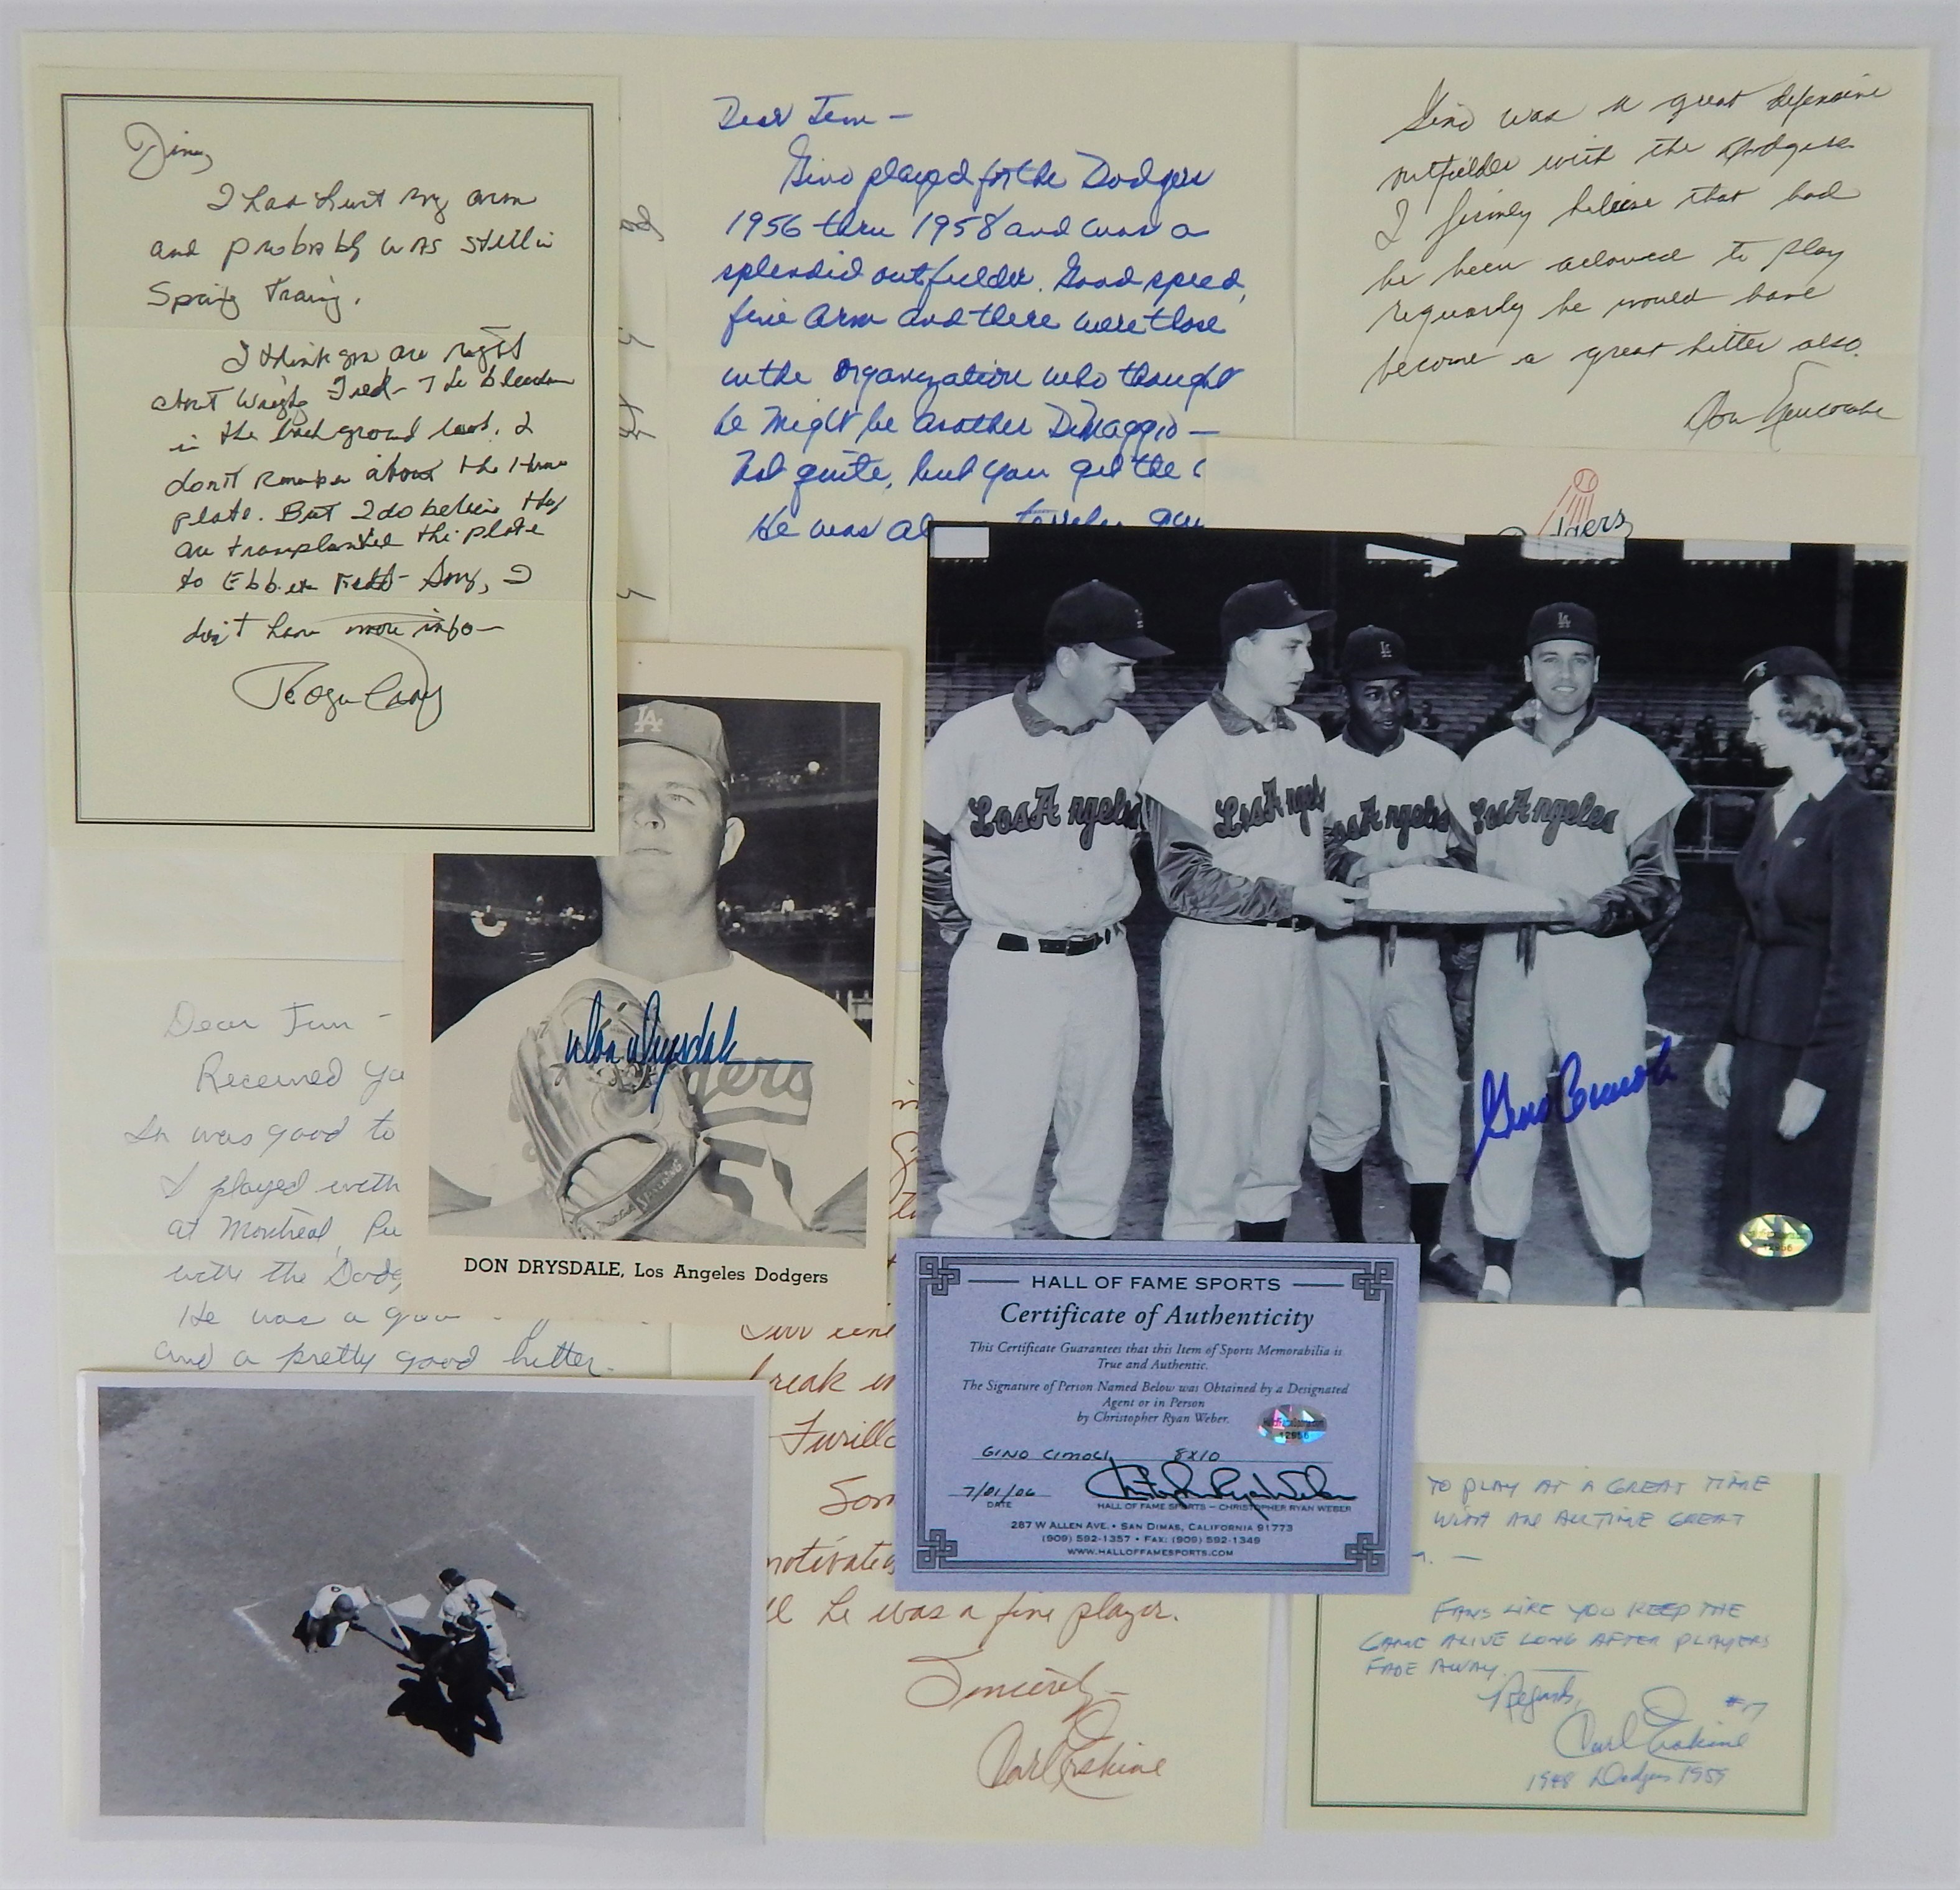 Baseball Autographs - Dodgers Signed Cards, Letters (Snider), Notes and Pictures(Drysdale) (90+)